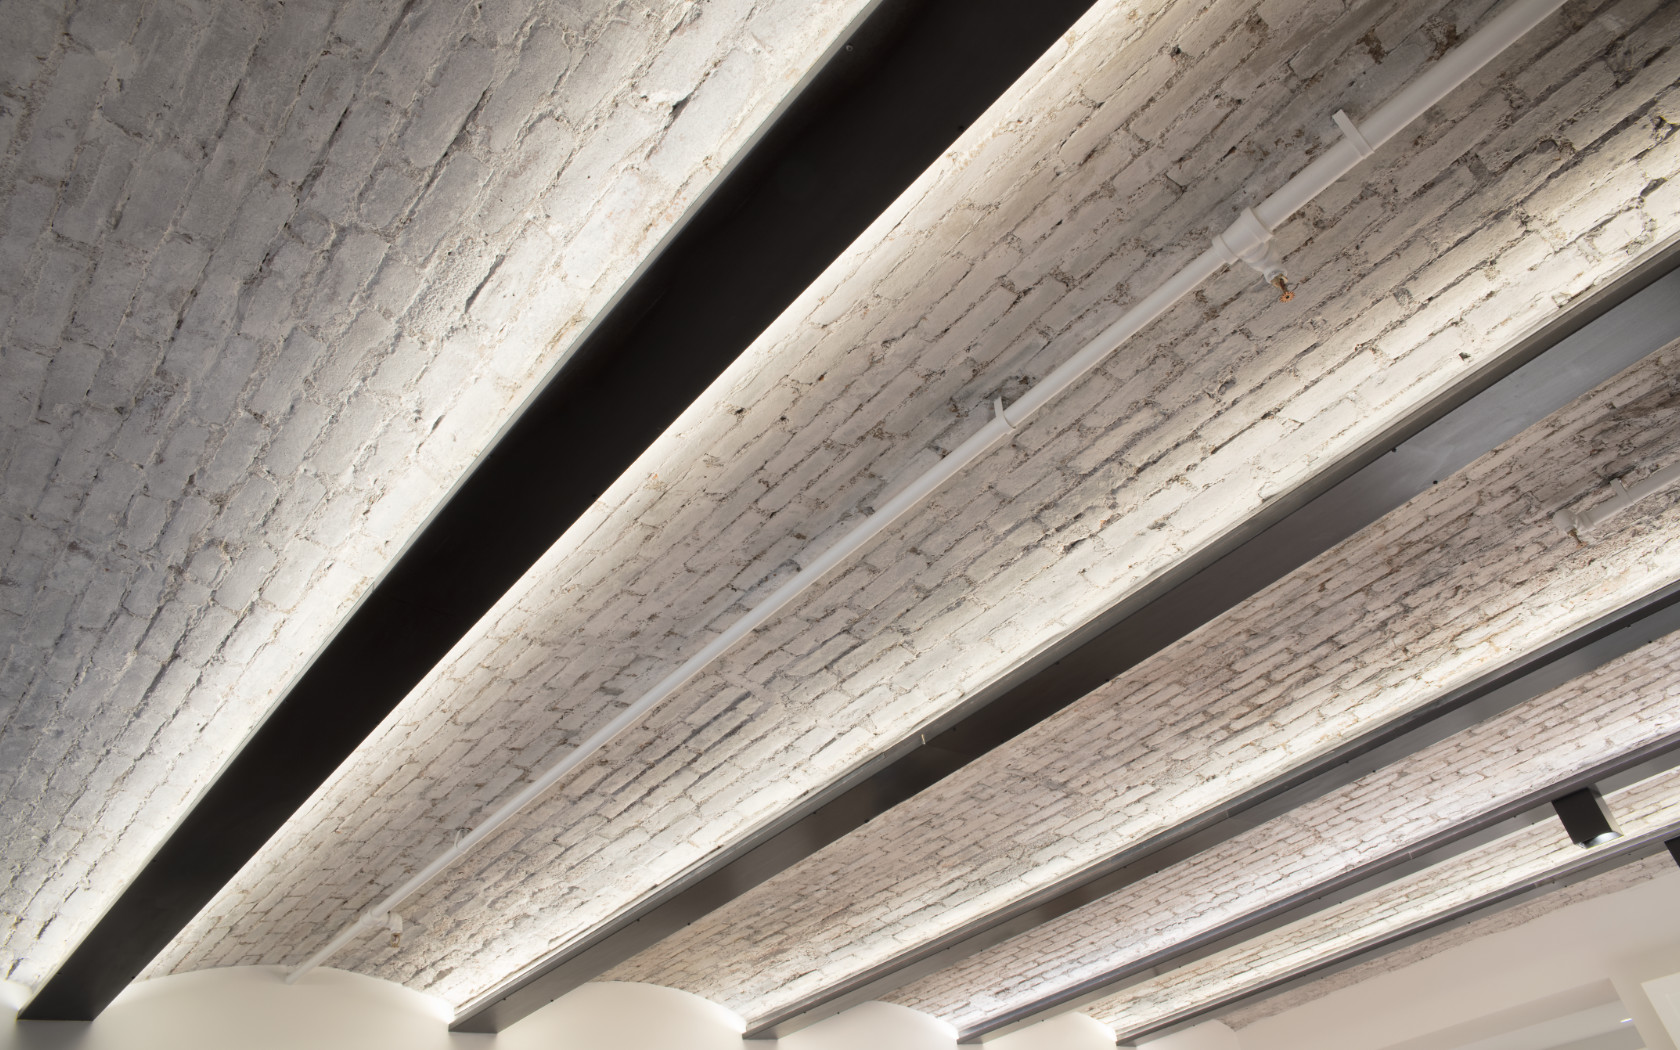 A repeating brick barrel-vaulted ceiling is painted white and is illuminated with recessed lighting in this Tribeca loft